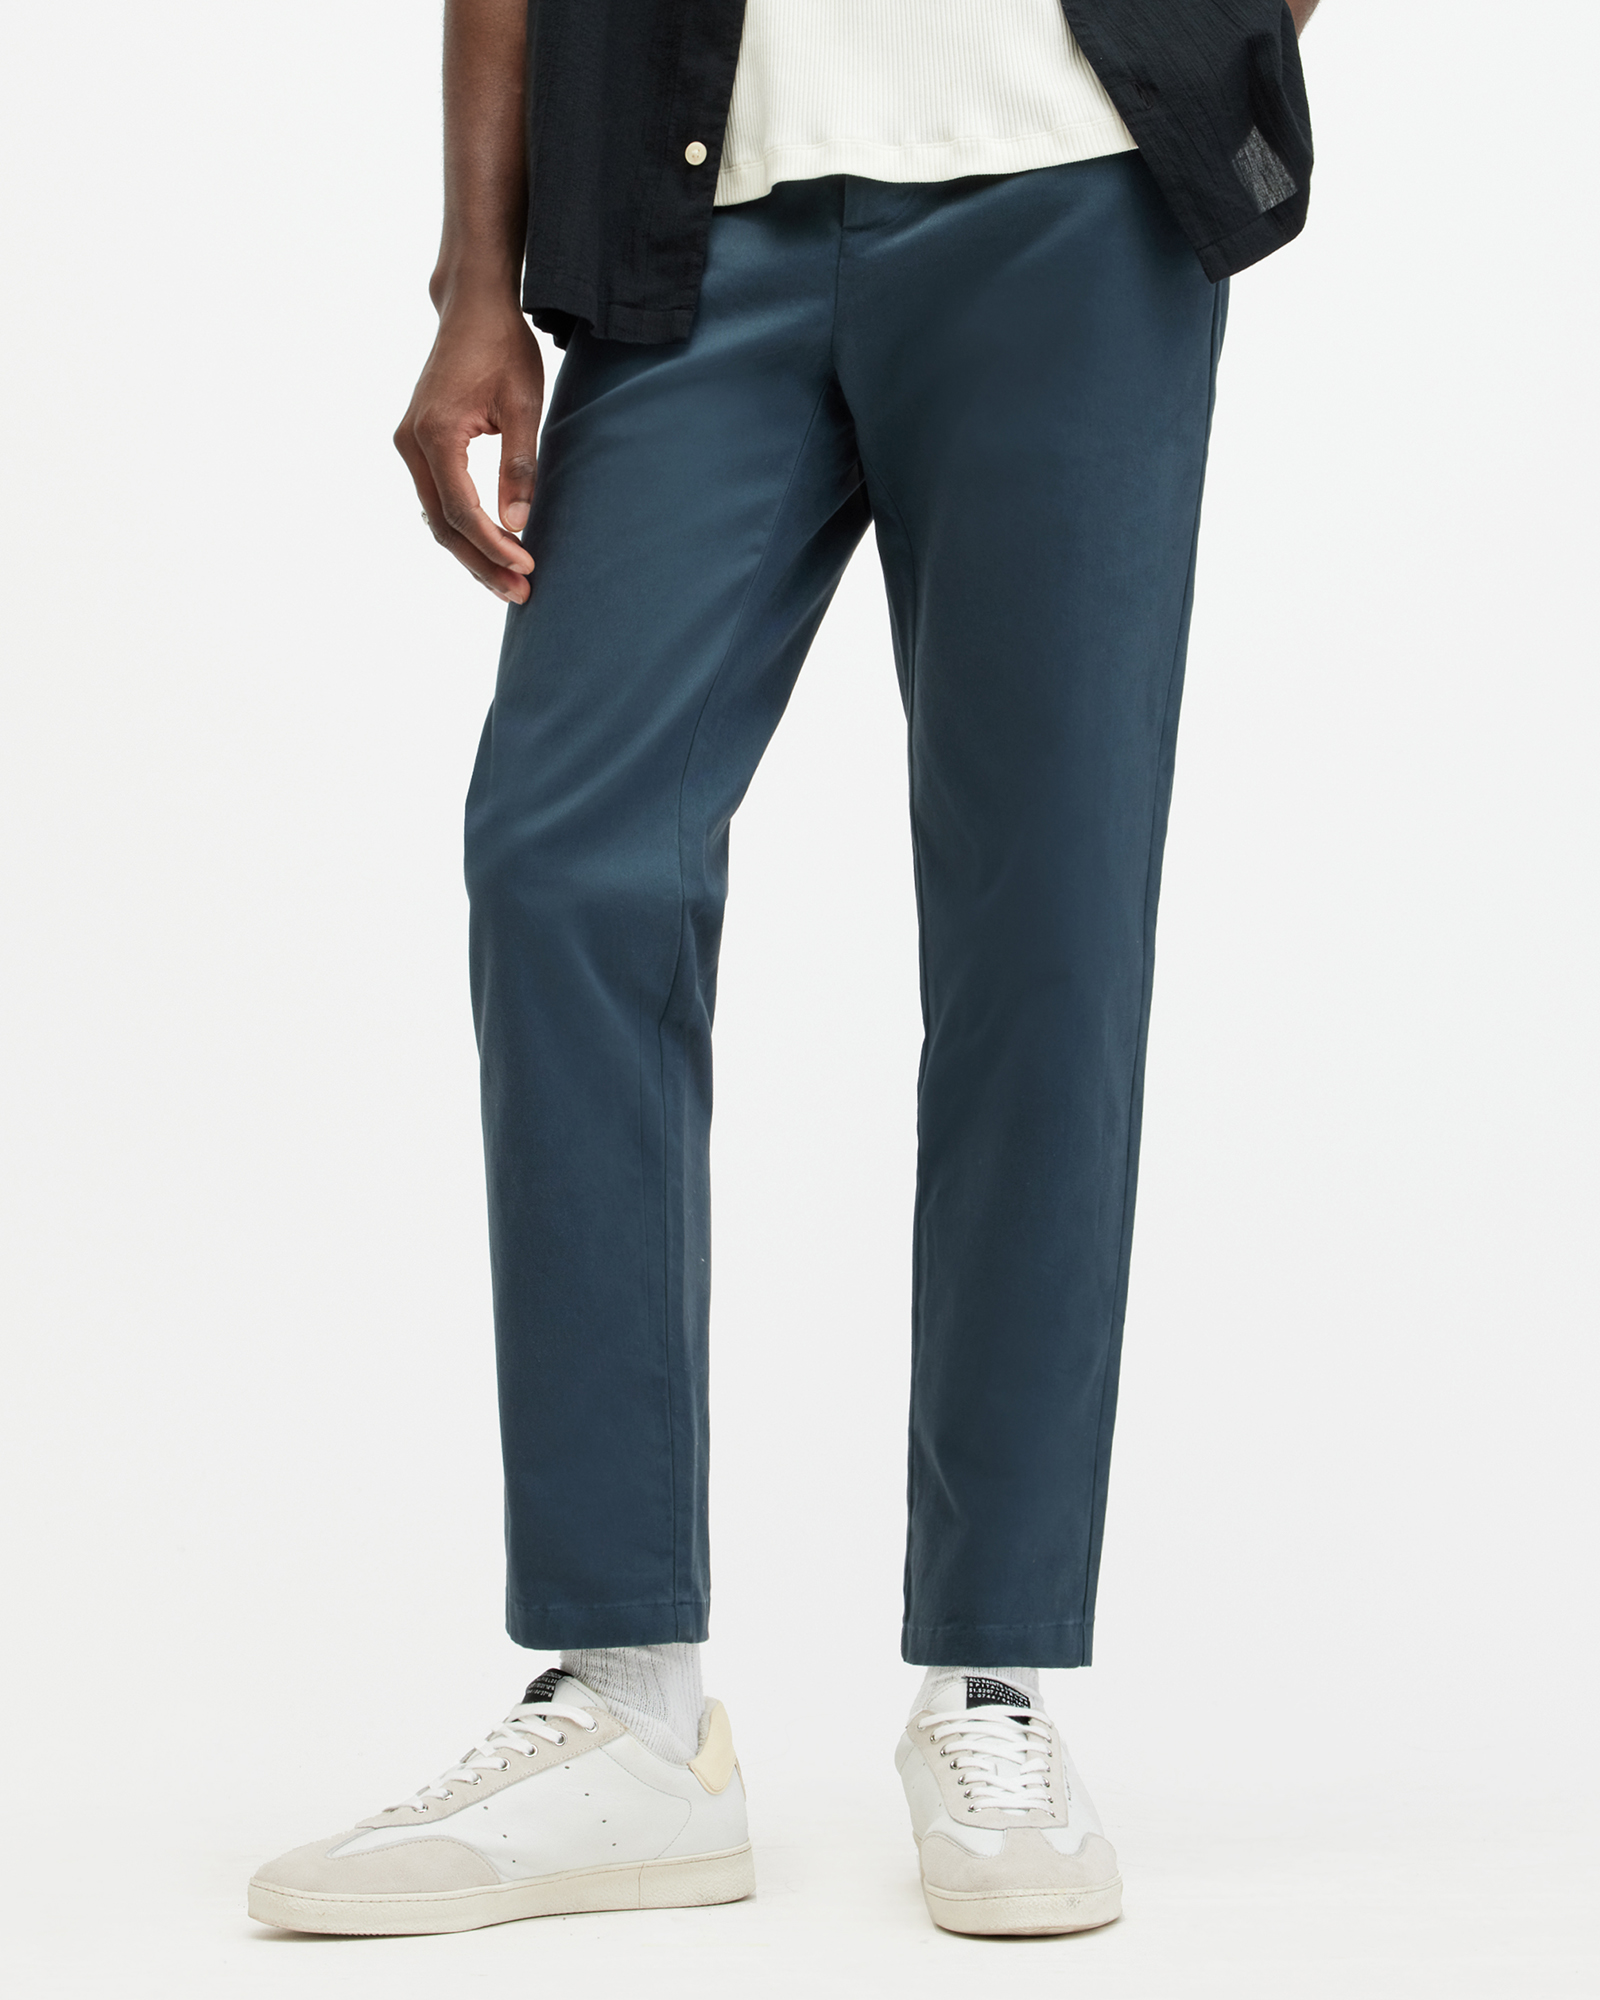 AllSaints Walde Skinny Fit Chino Trousers,, Size: